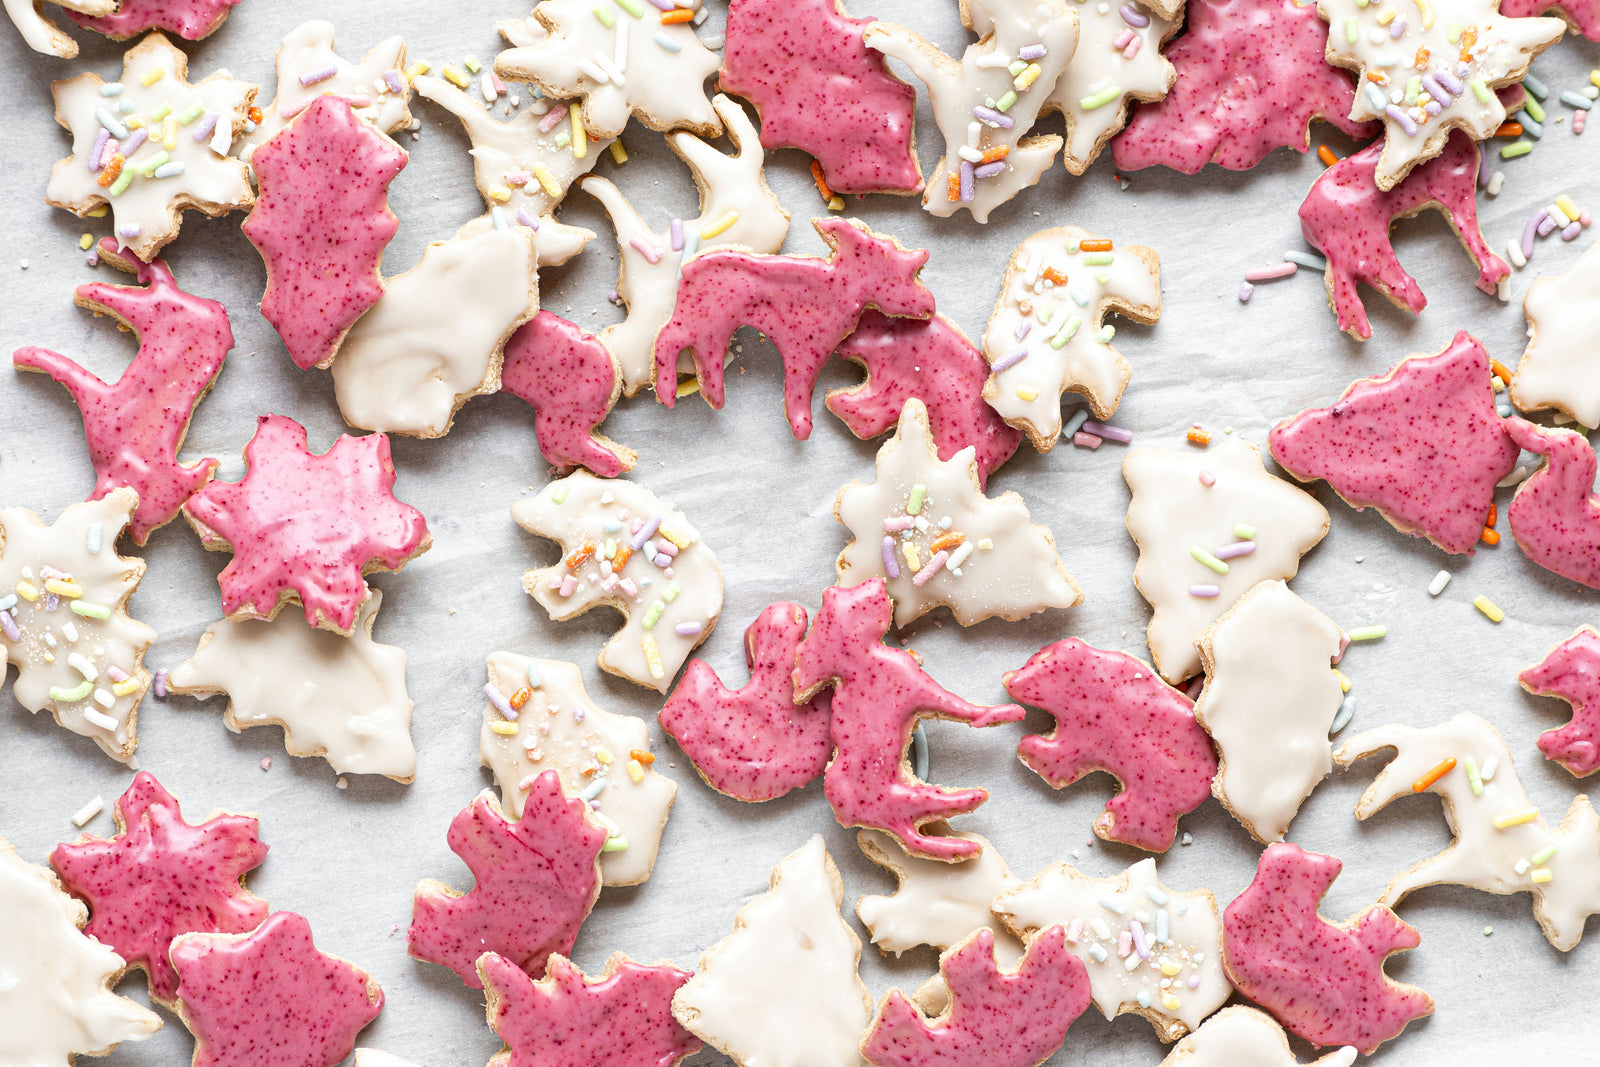 homemade grain-free animal crackers on a tray. decorated with white and pink icing and sprinkles.